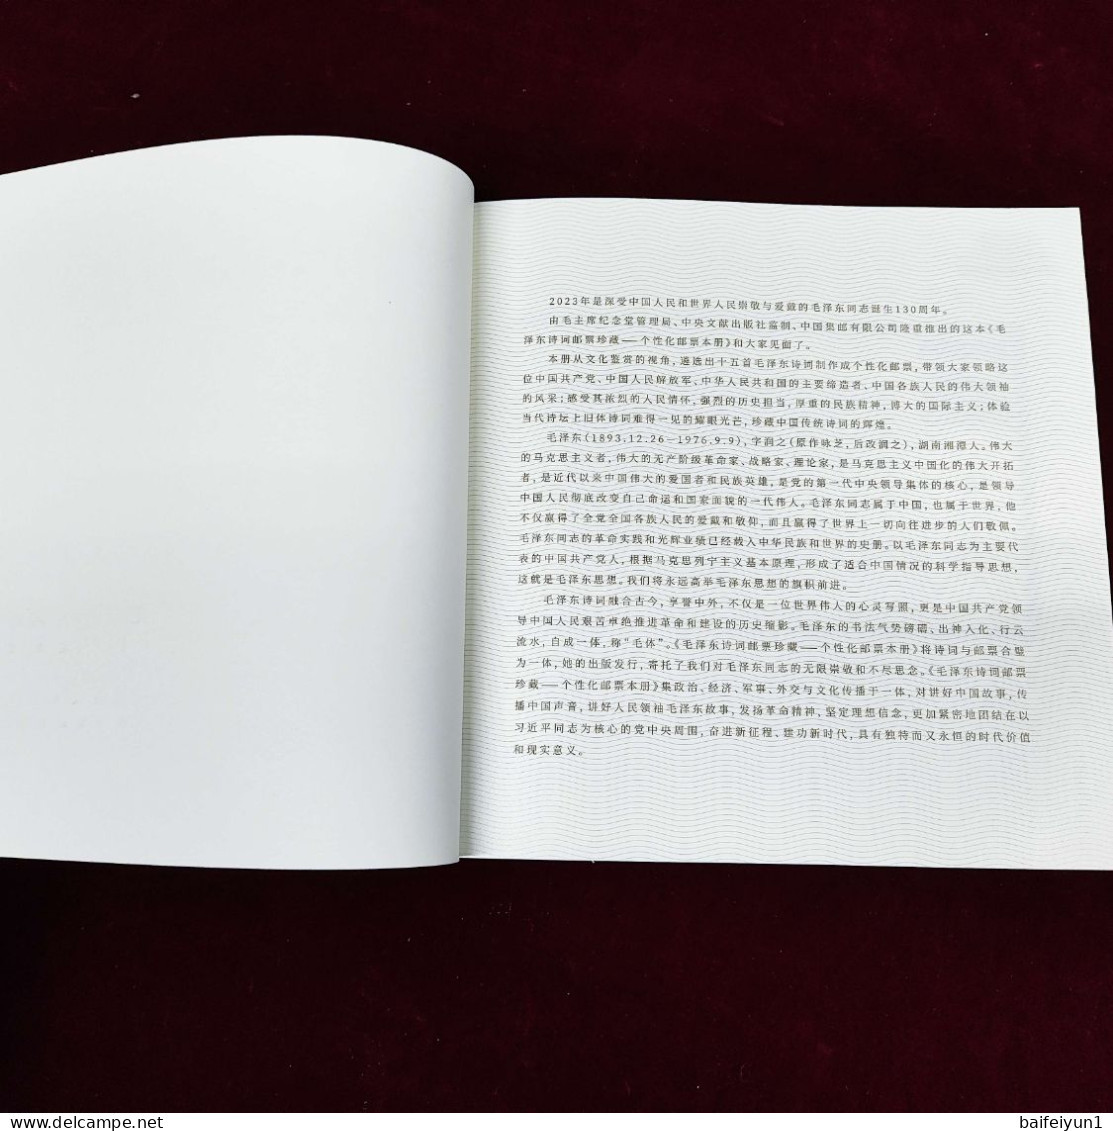 China 2023 GPB-21 The Poetry Of Mao Zedong Special  Booklet - Neufs